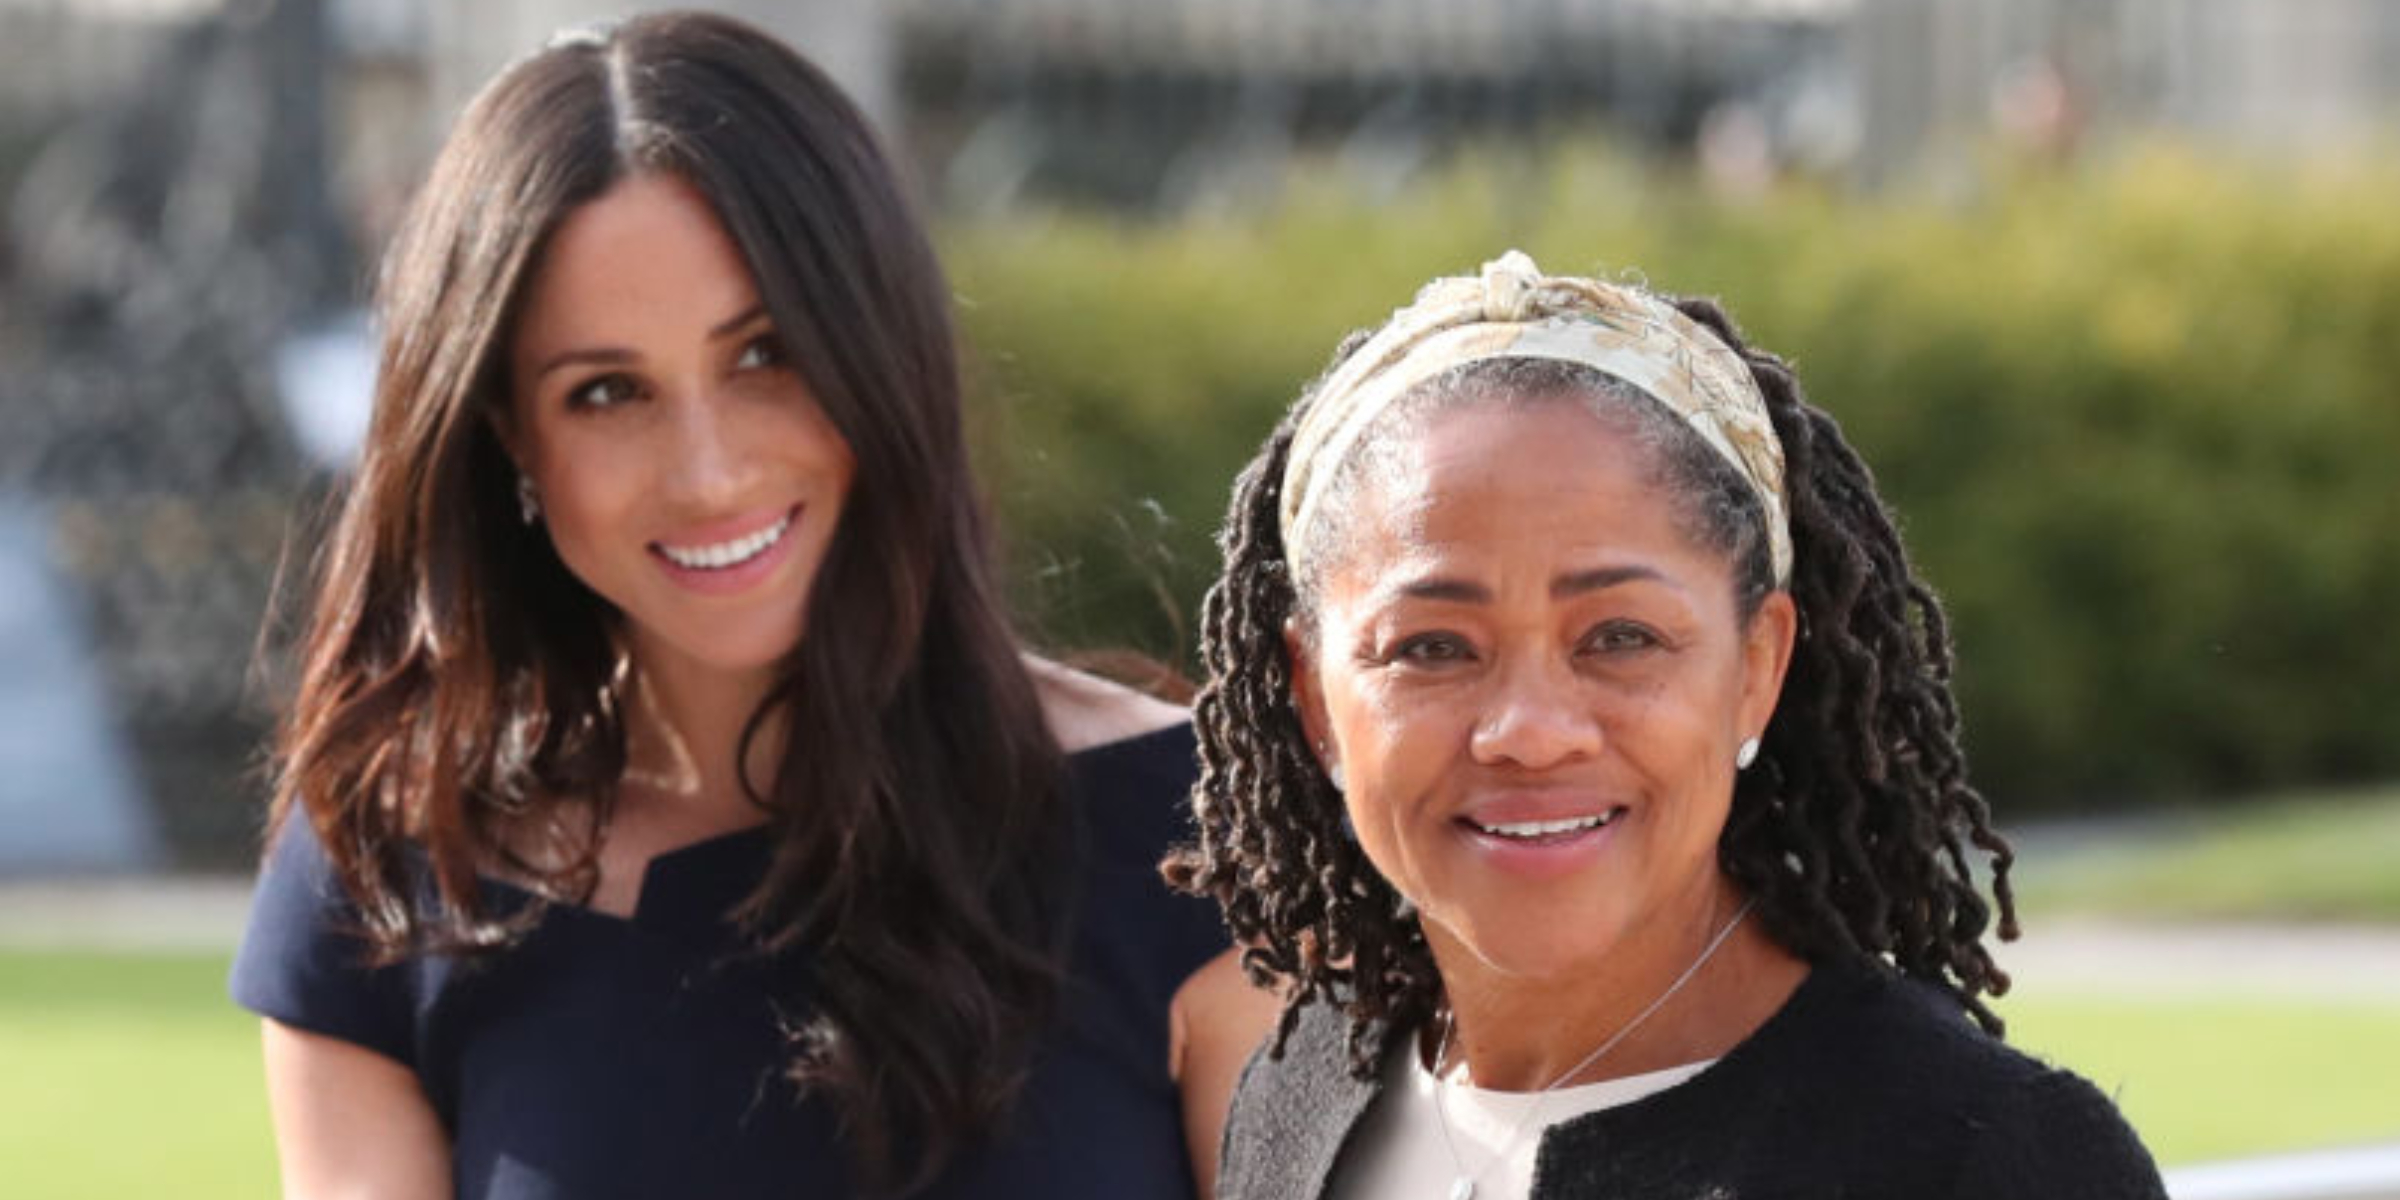 Doria Ragland and Tina Knowles | Source: Getty Images